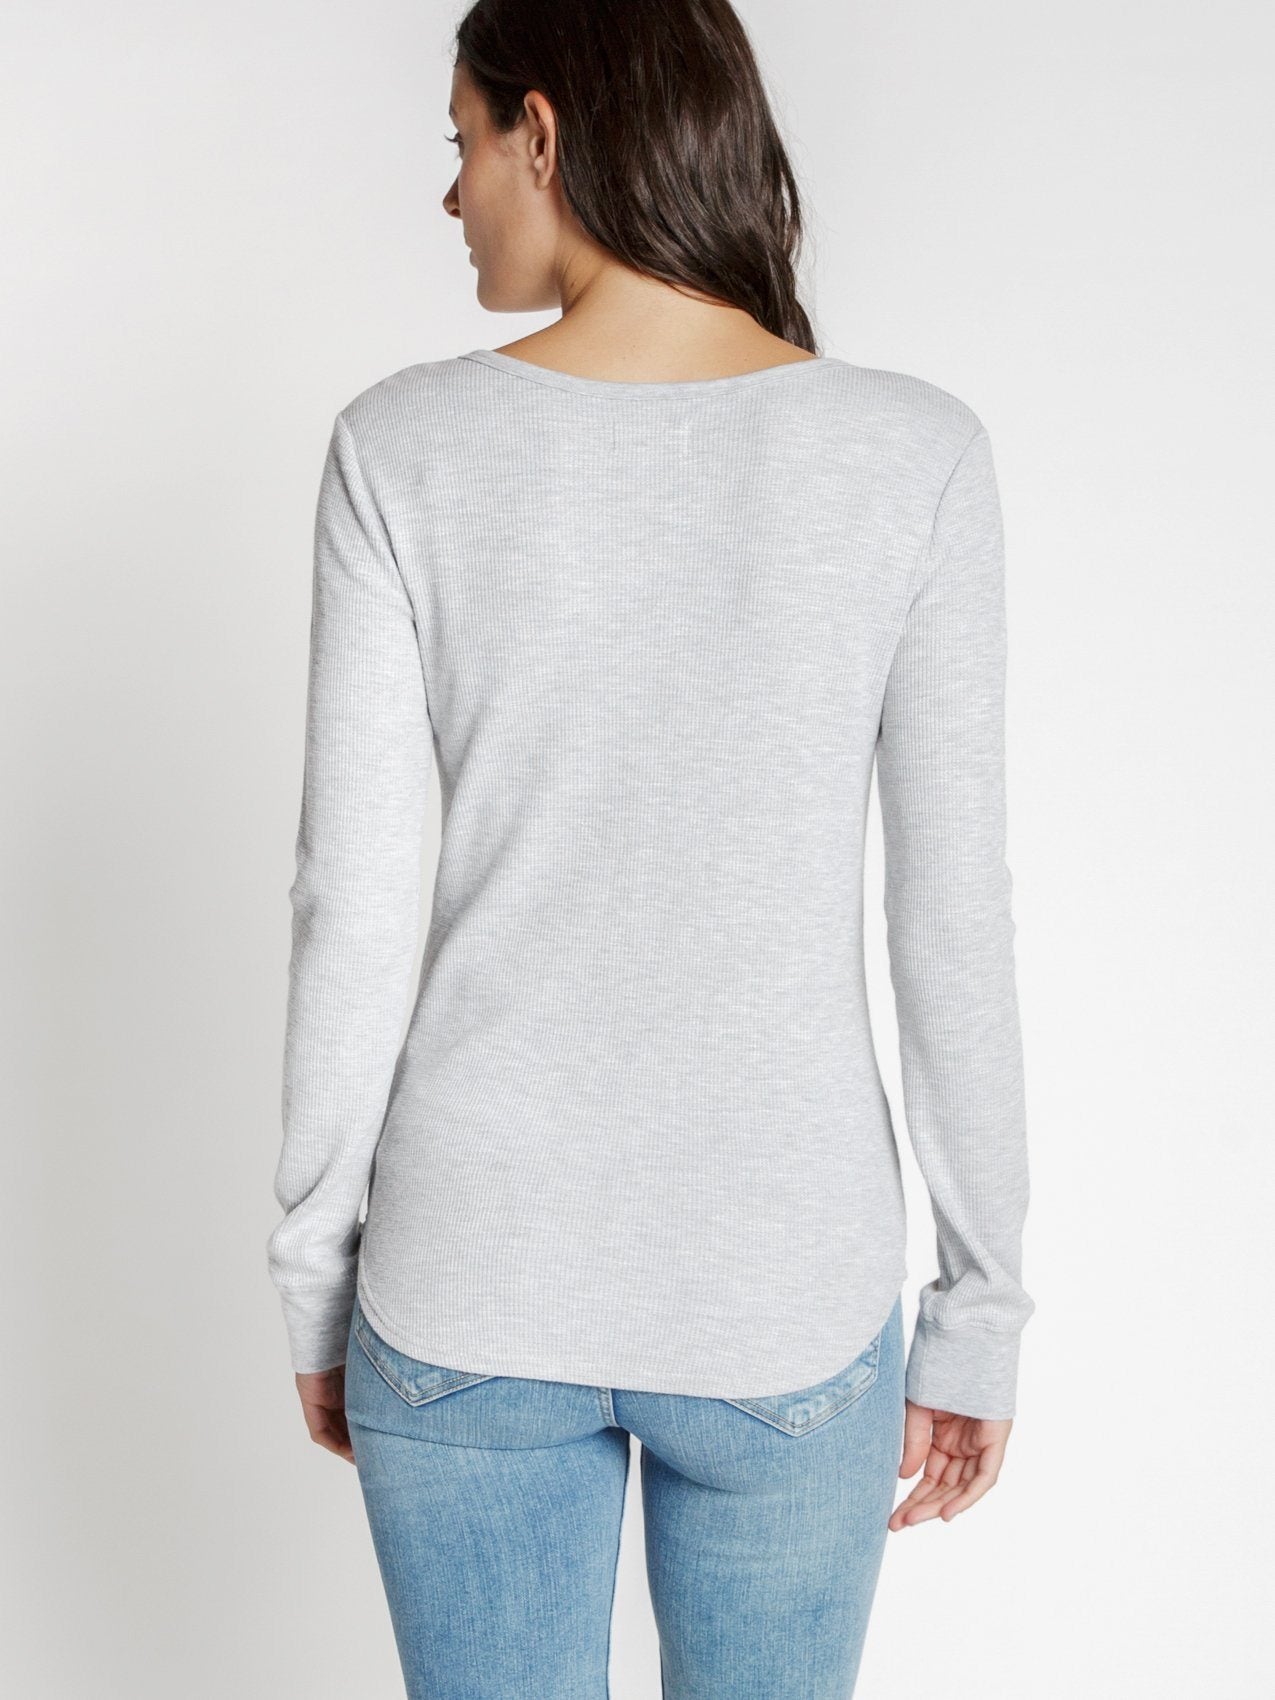 Maeve Waffle Knit Henley Top